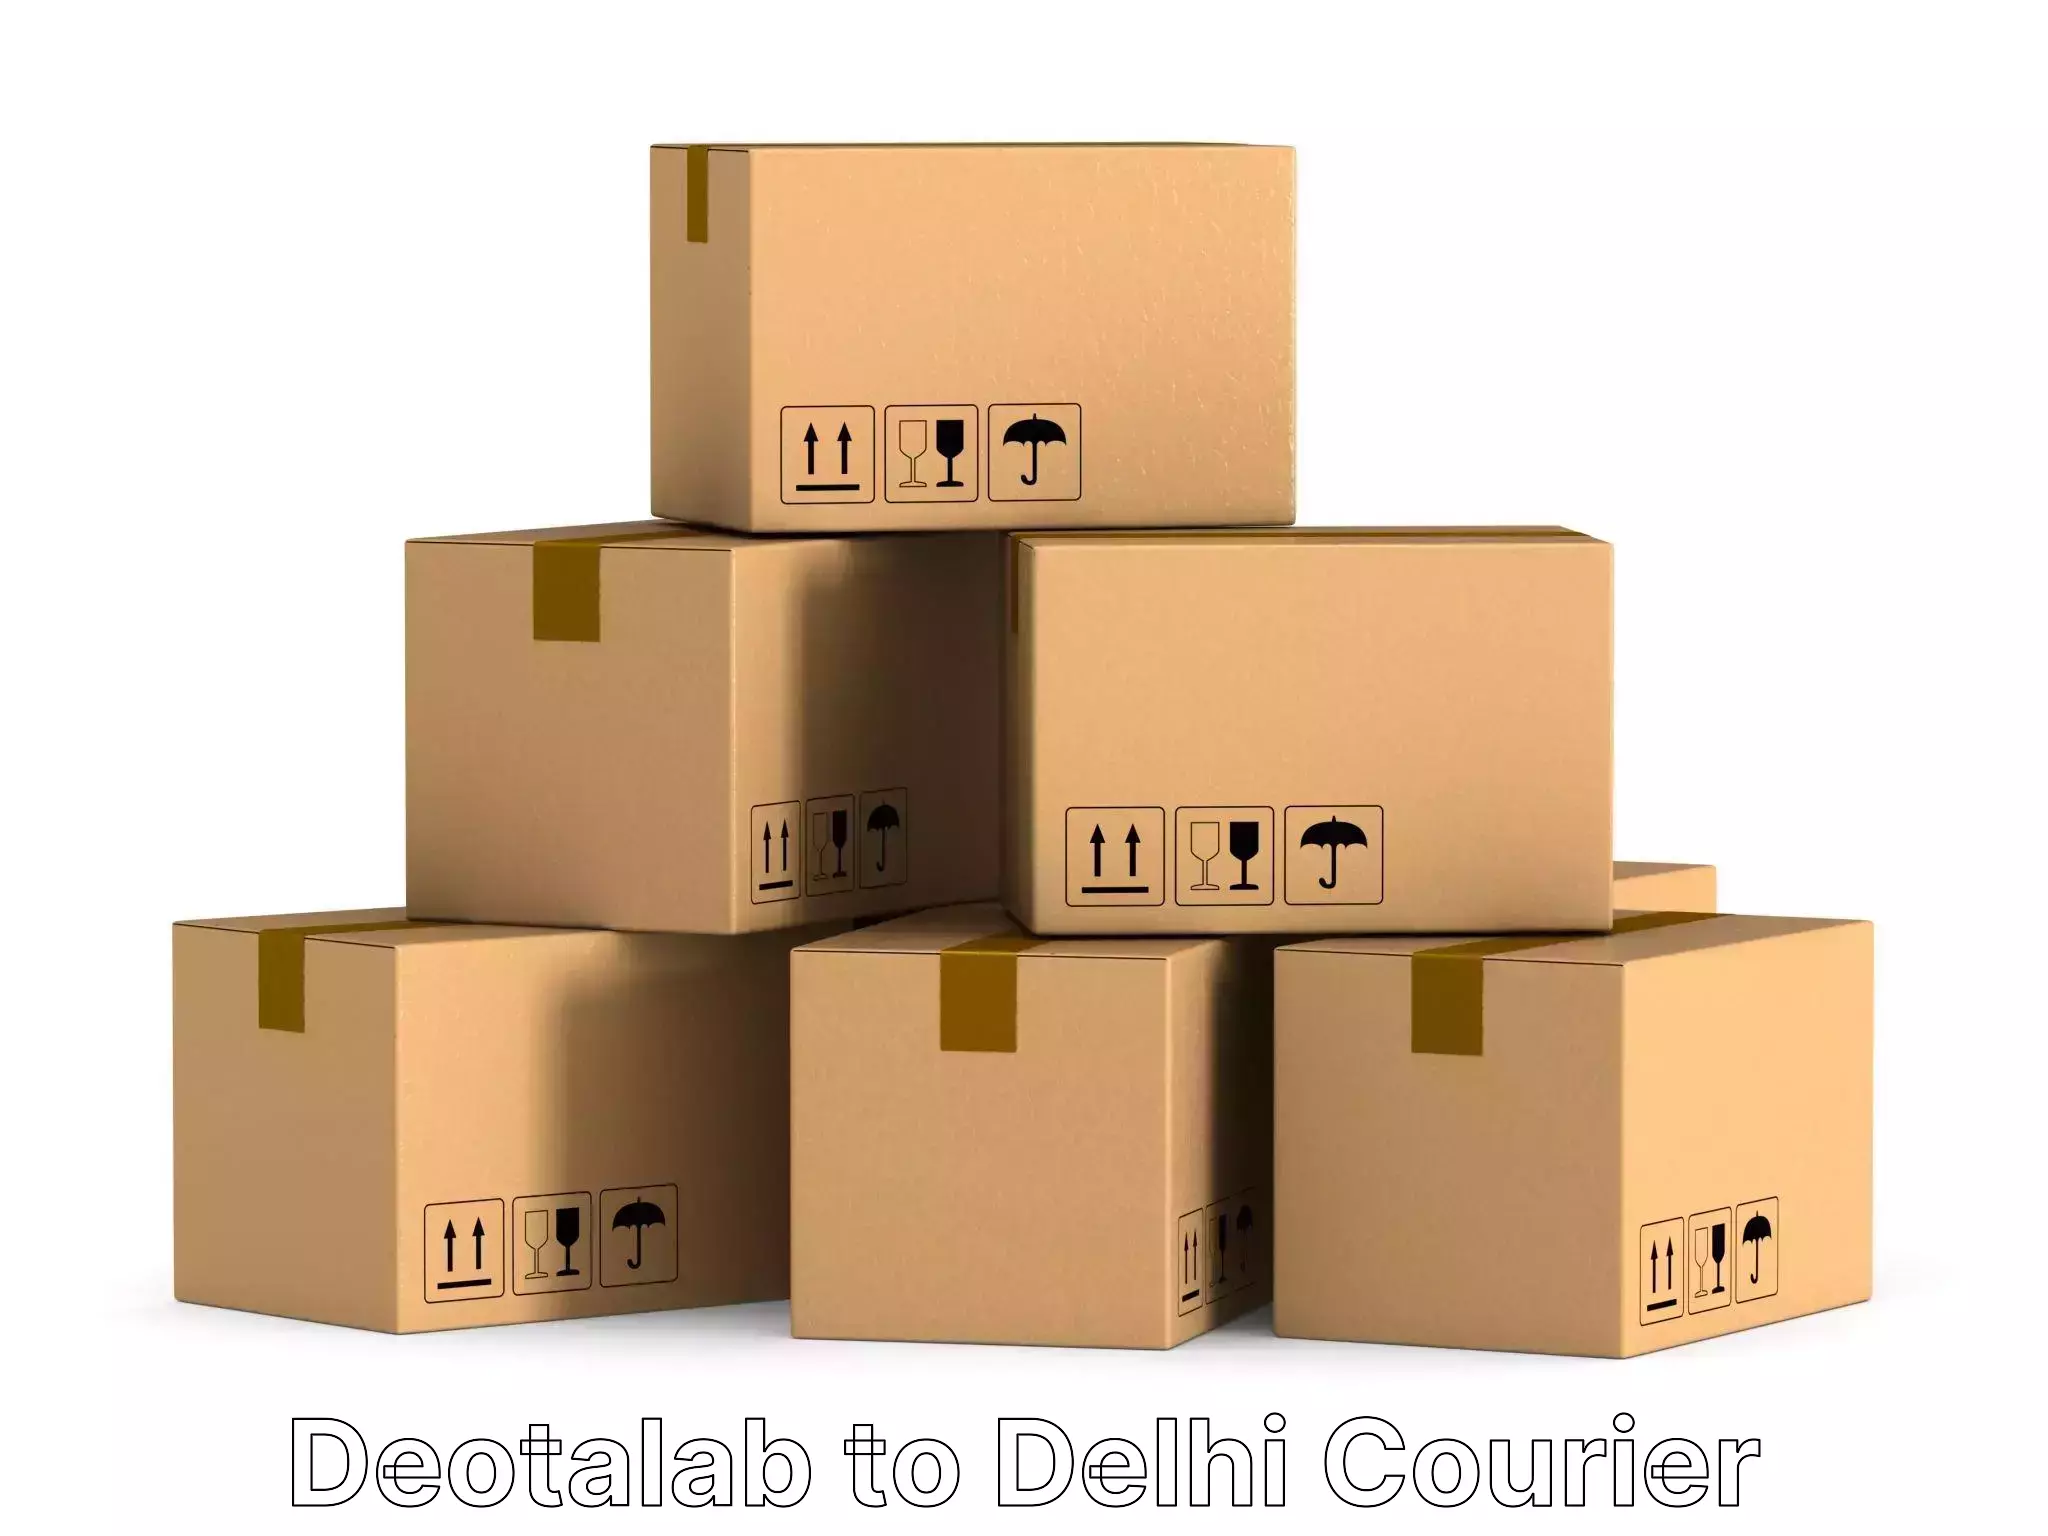 Furniture delivery service Deotalab to East Delhi